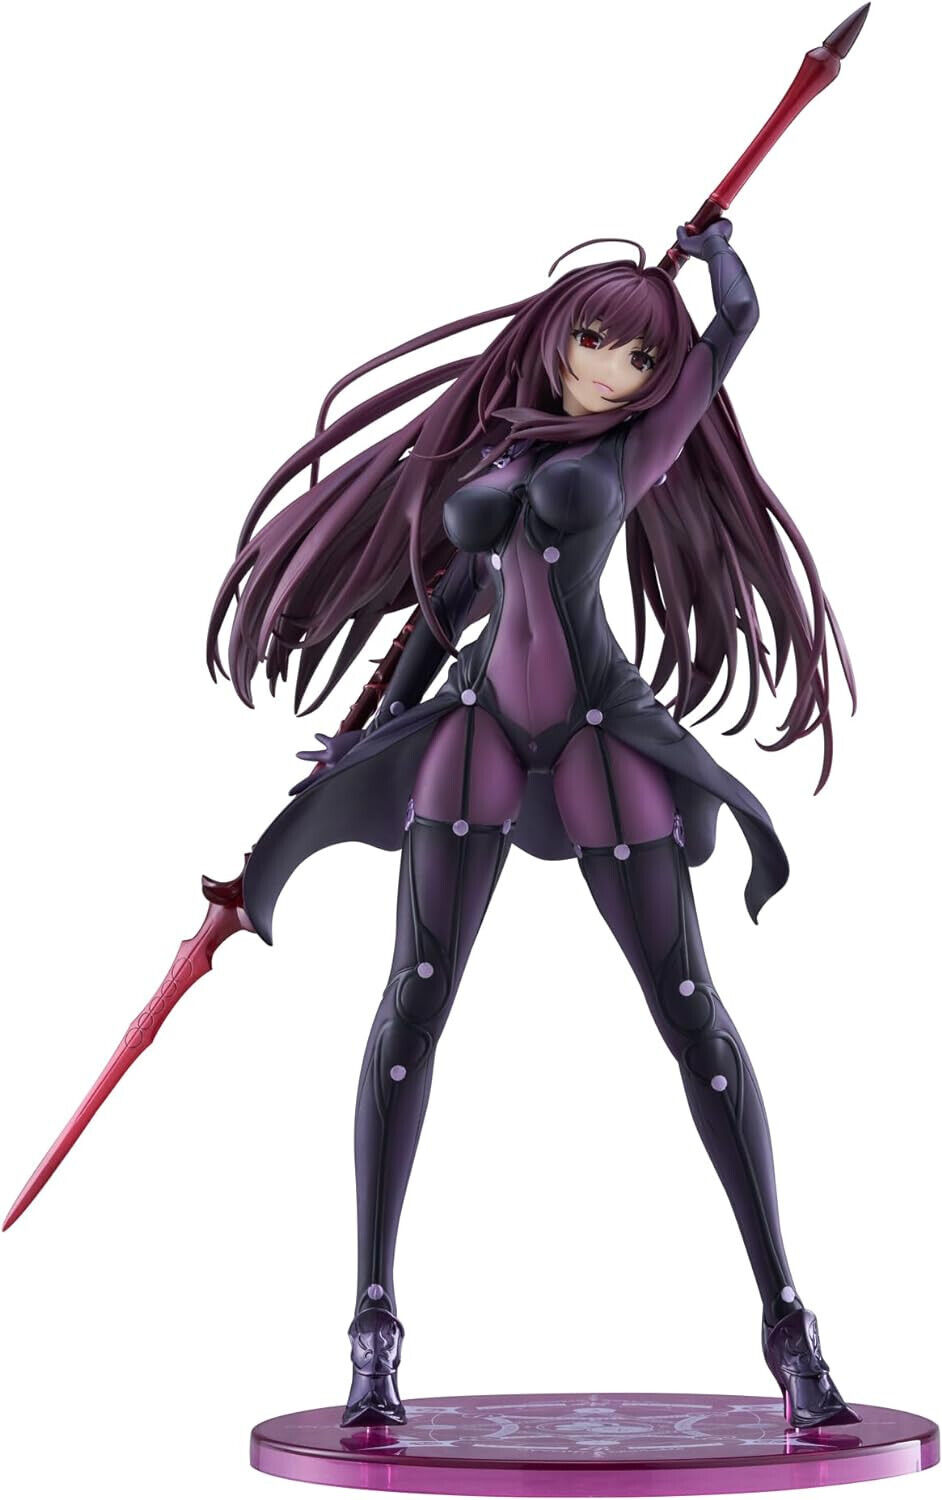 PLUM PLUMPMOA Fate/Grand Order Lancer/Scathach 1/7 PVC Figure w/ Tracking NEW